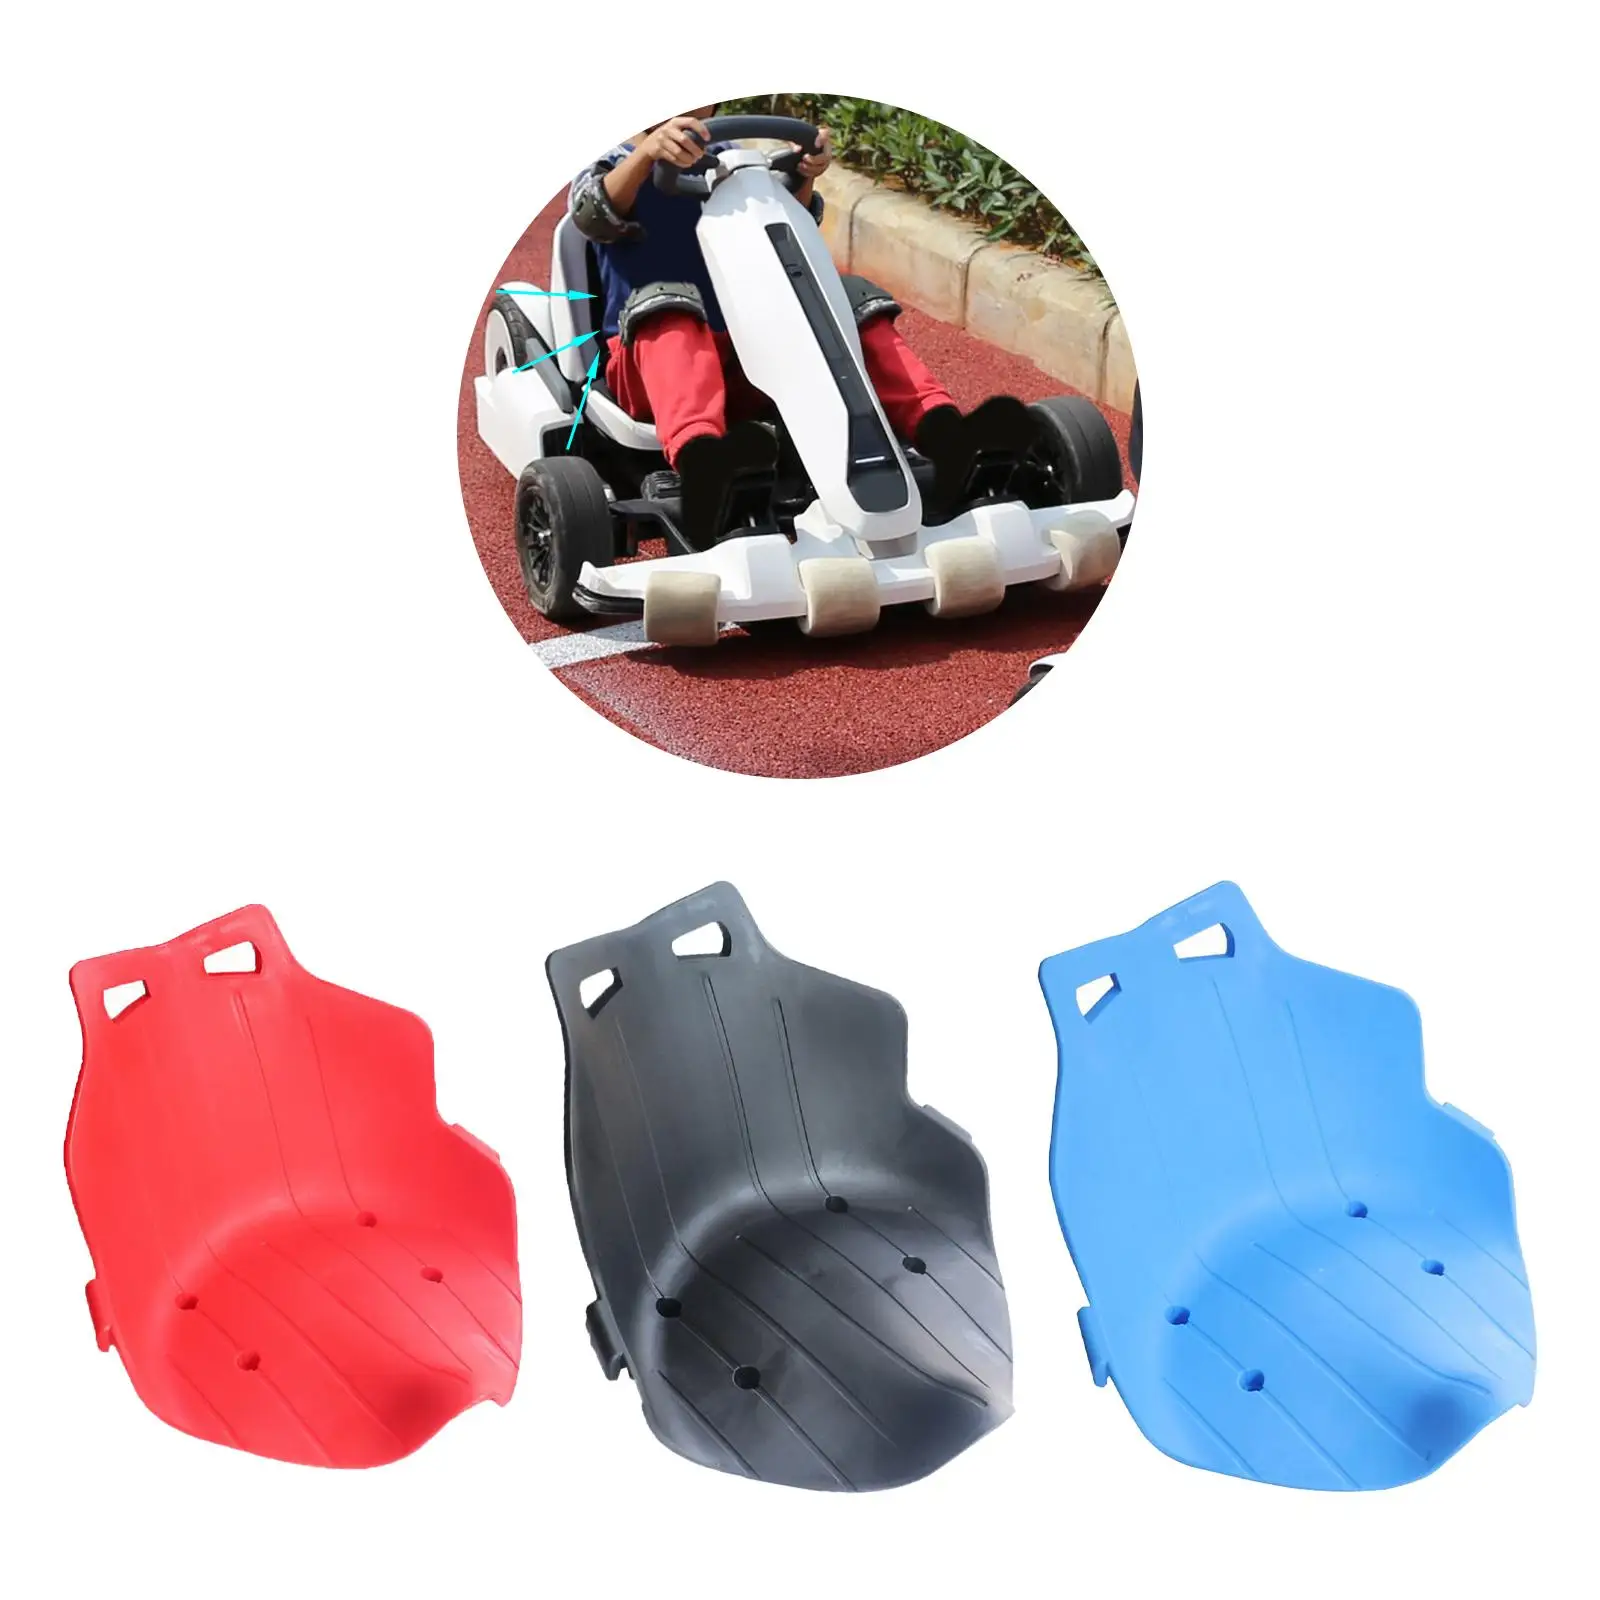 Kids Seat Attachment,DIY Low Back for Balance Karting Vhicles, Durable Drift Trikes Seat Saddle, Kart Go Seat